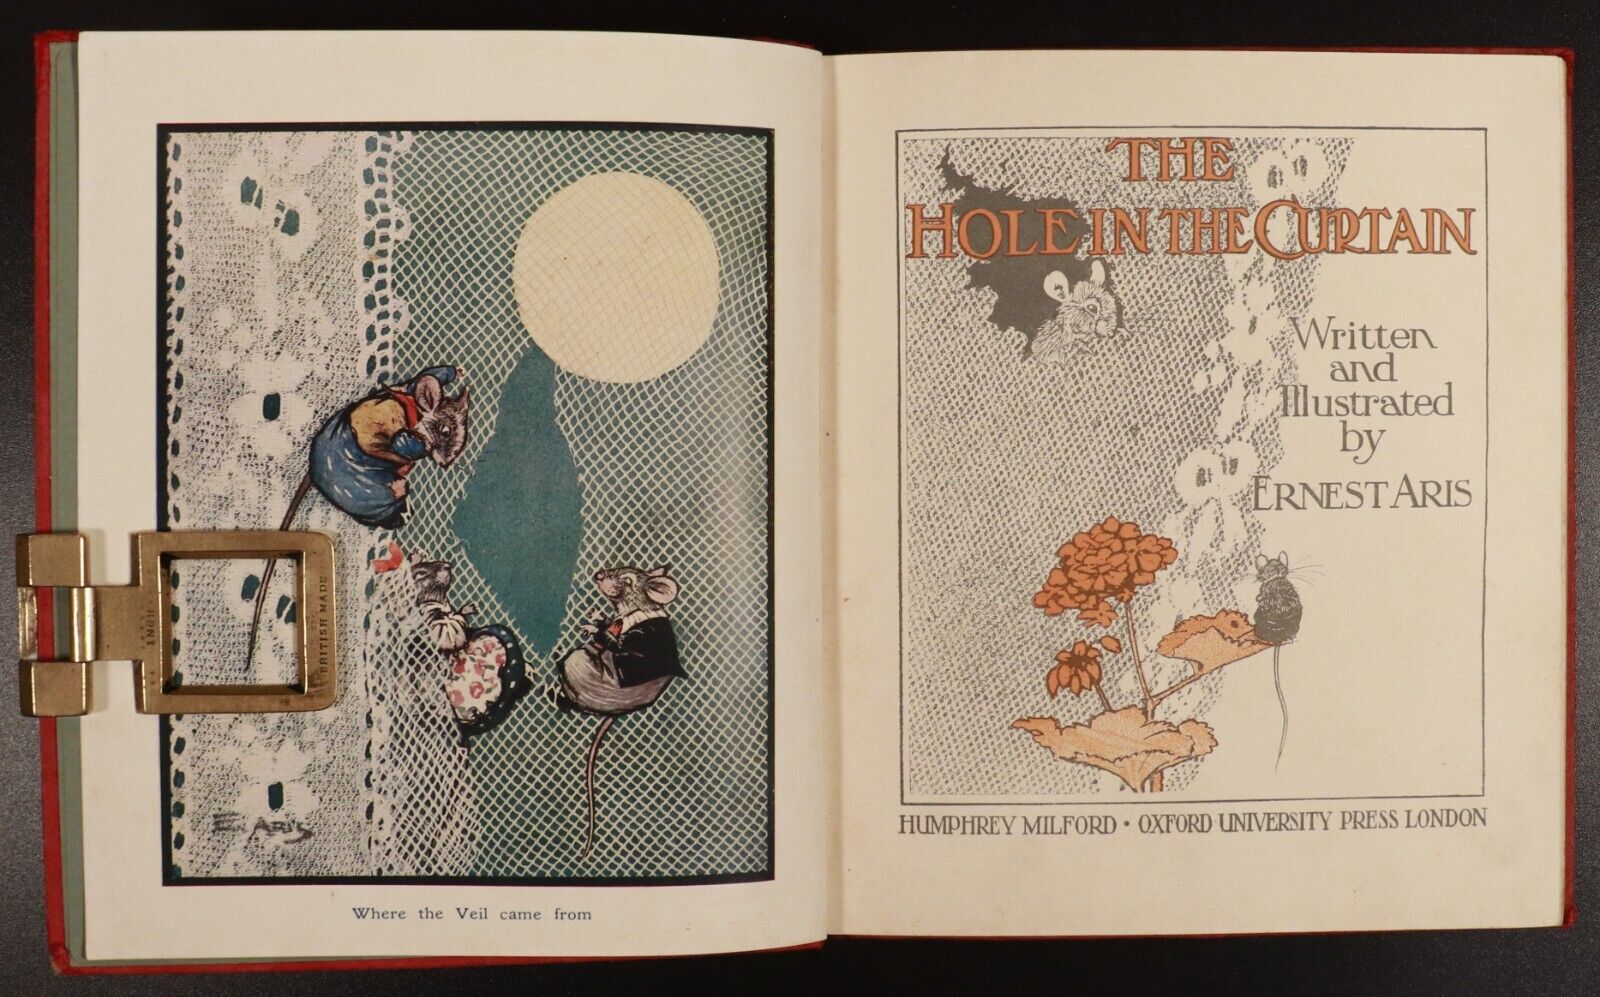 1922 The Hole In The Curtain by Ernest Aris - Antique 1st Edition Childrens Book